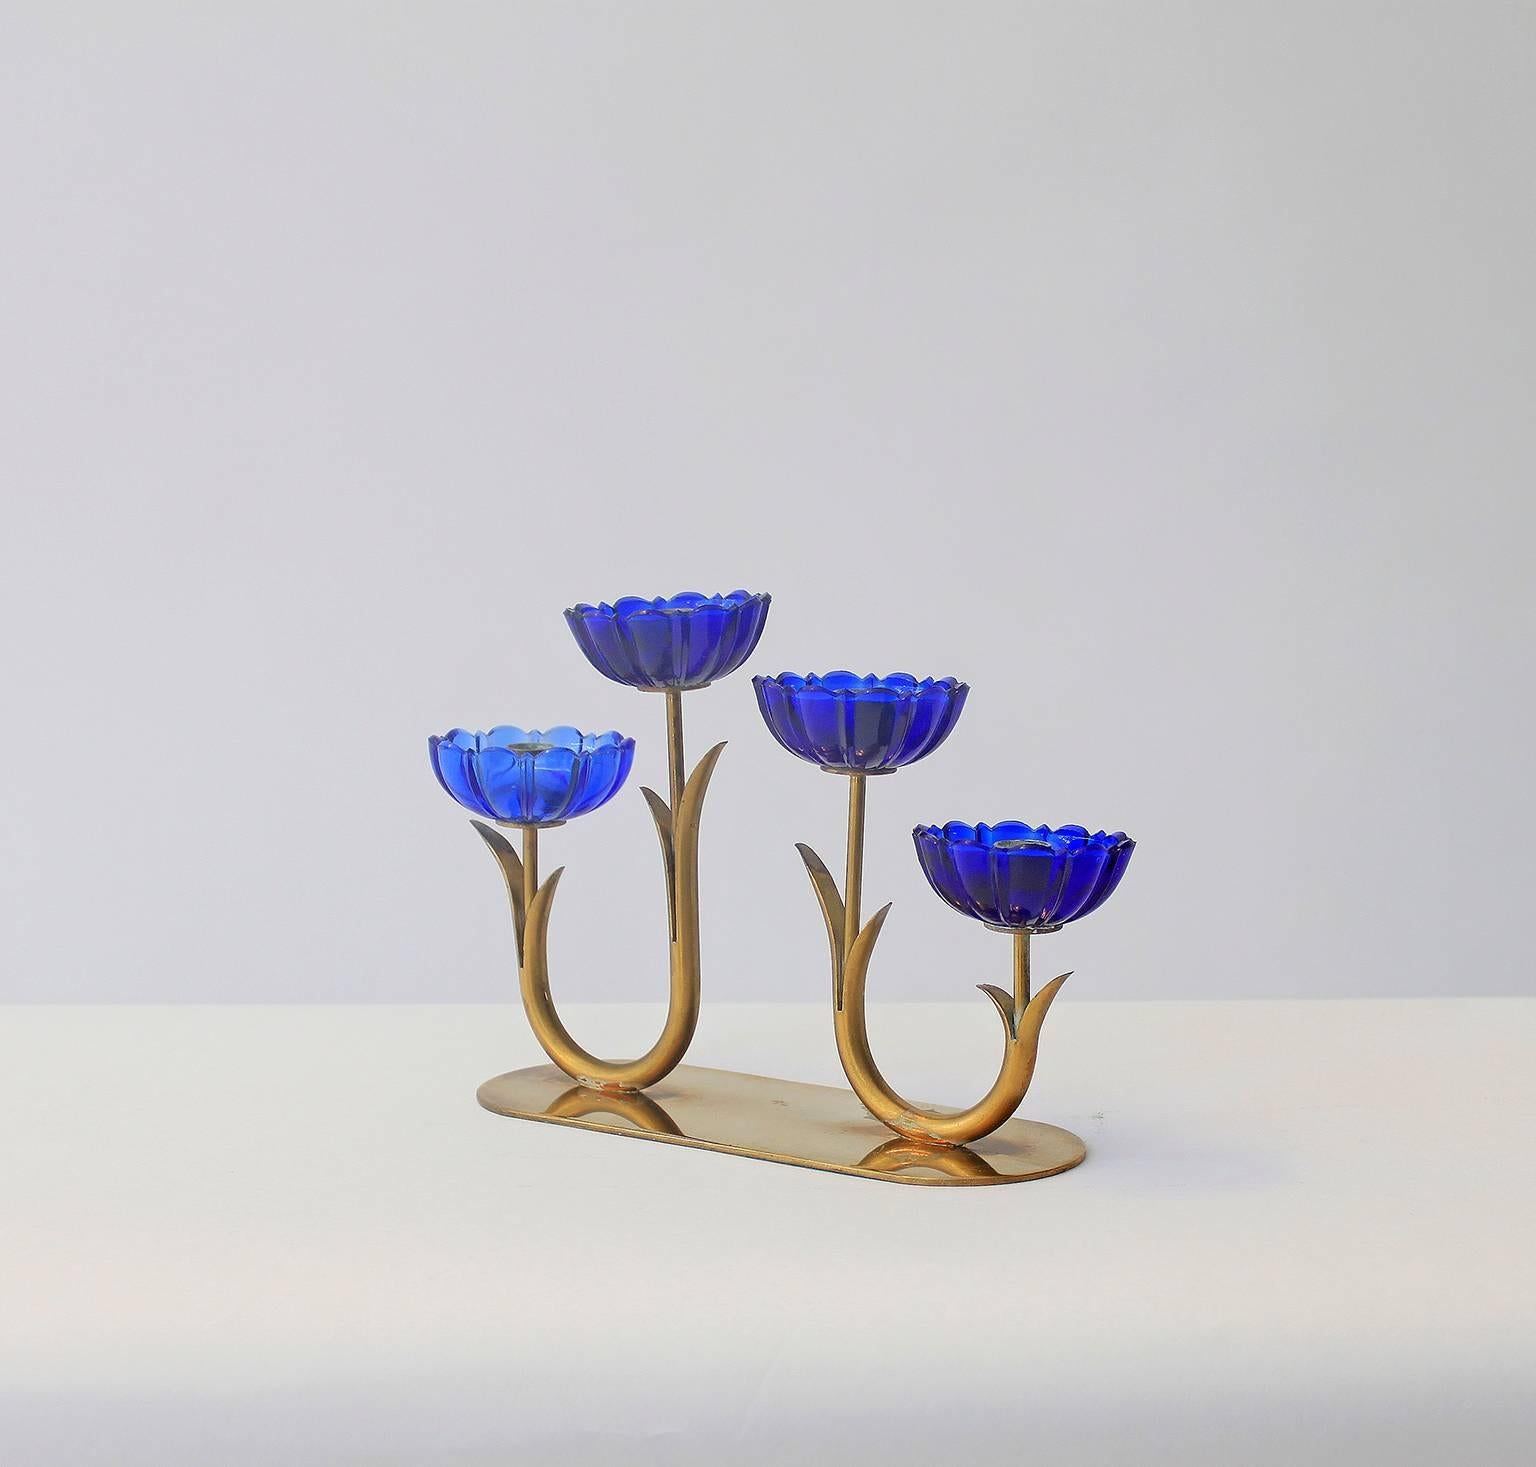 A blue flower candleholder from Sweden comprising four blue glass flowers on aged, patinated, gold-plated brass stems. Designed by Gunnar Ander for Ystad Metall.
 